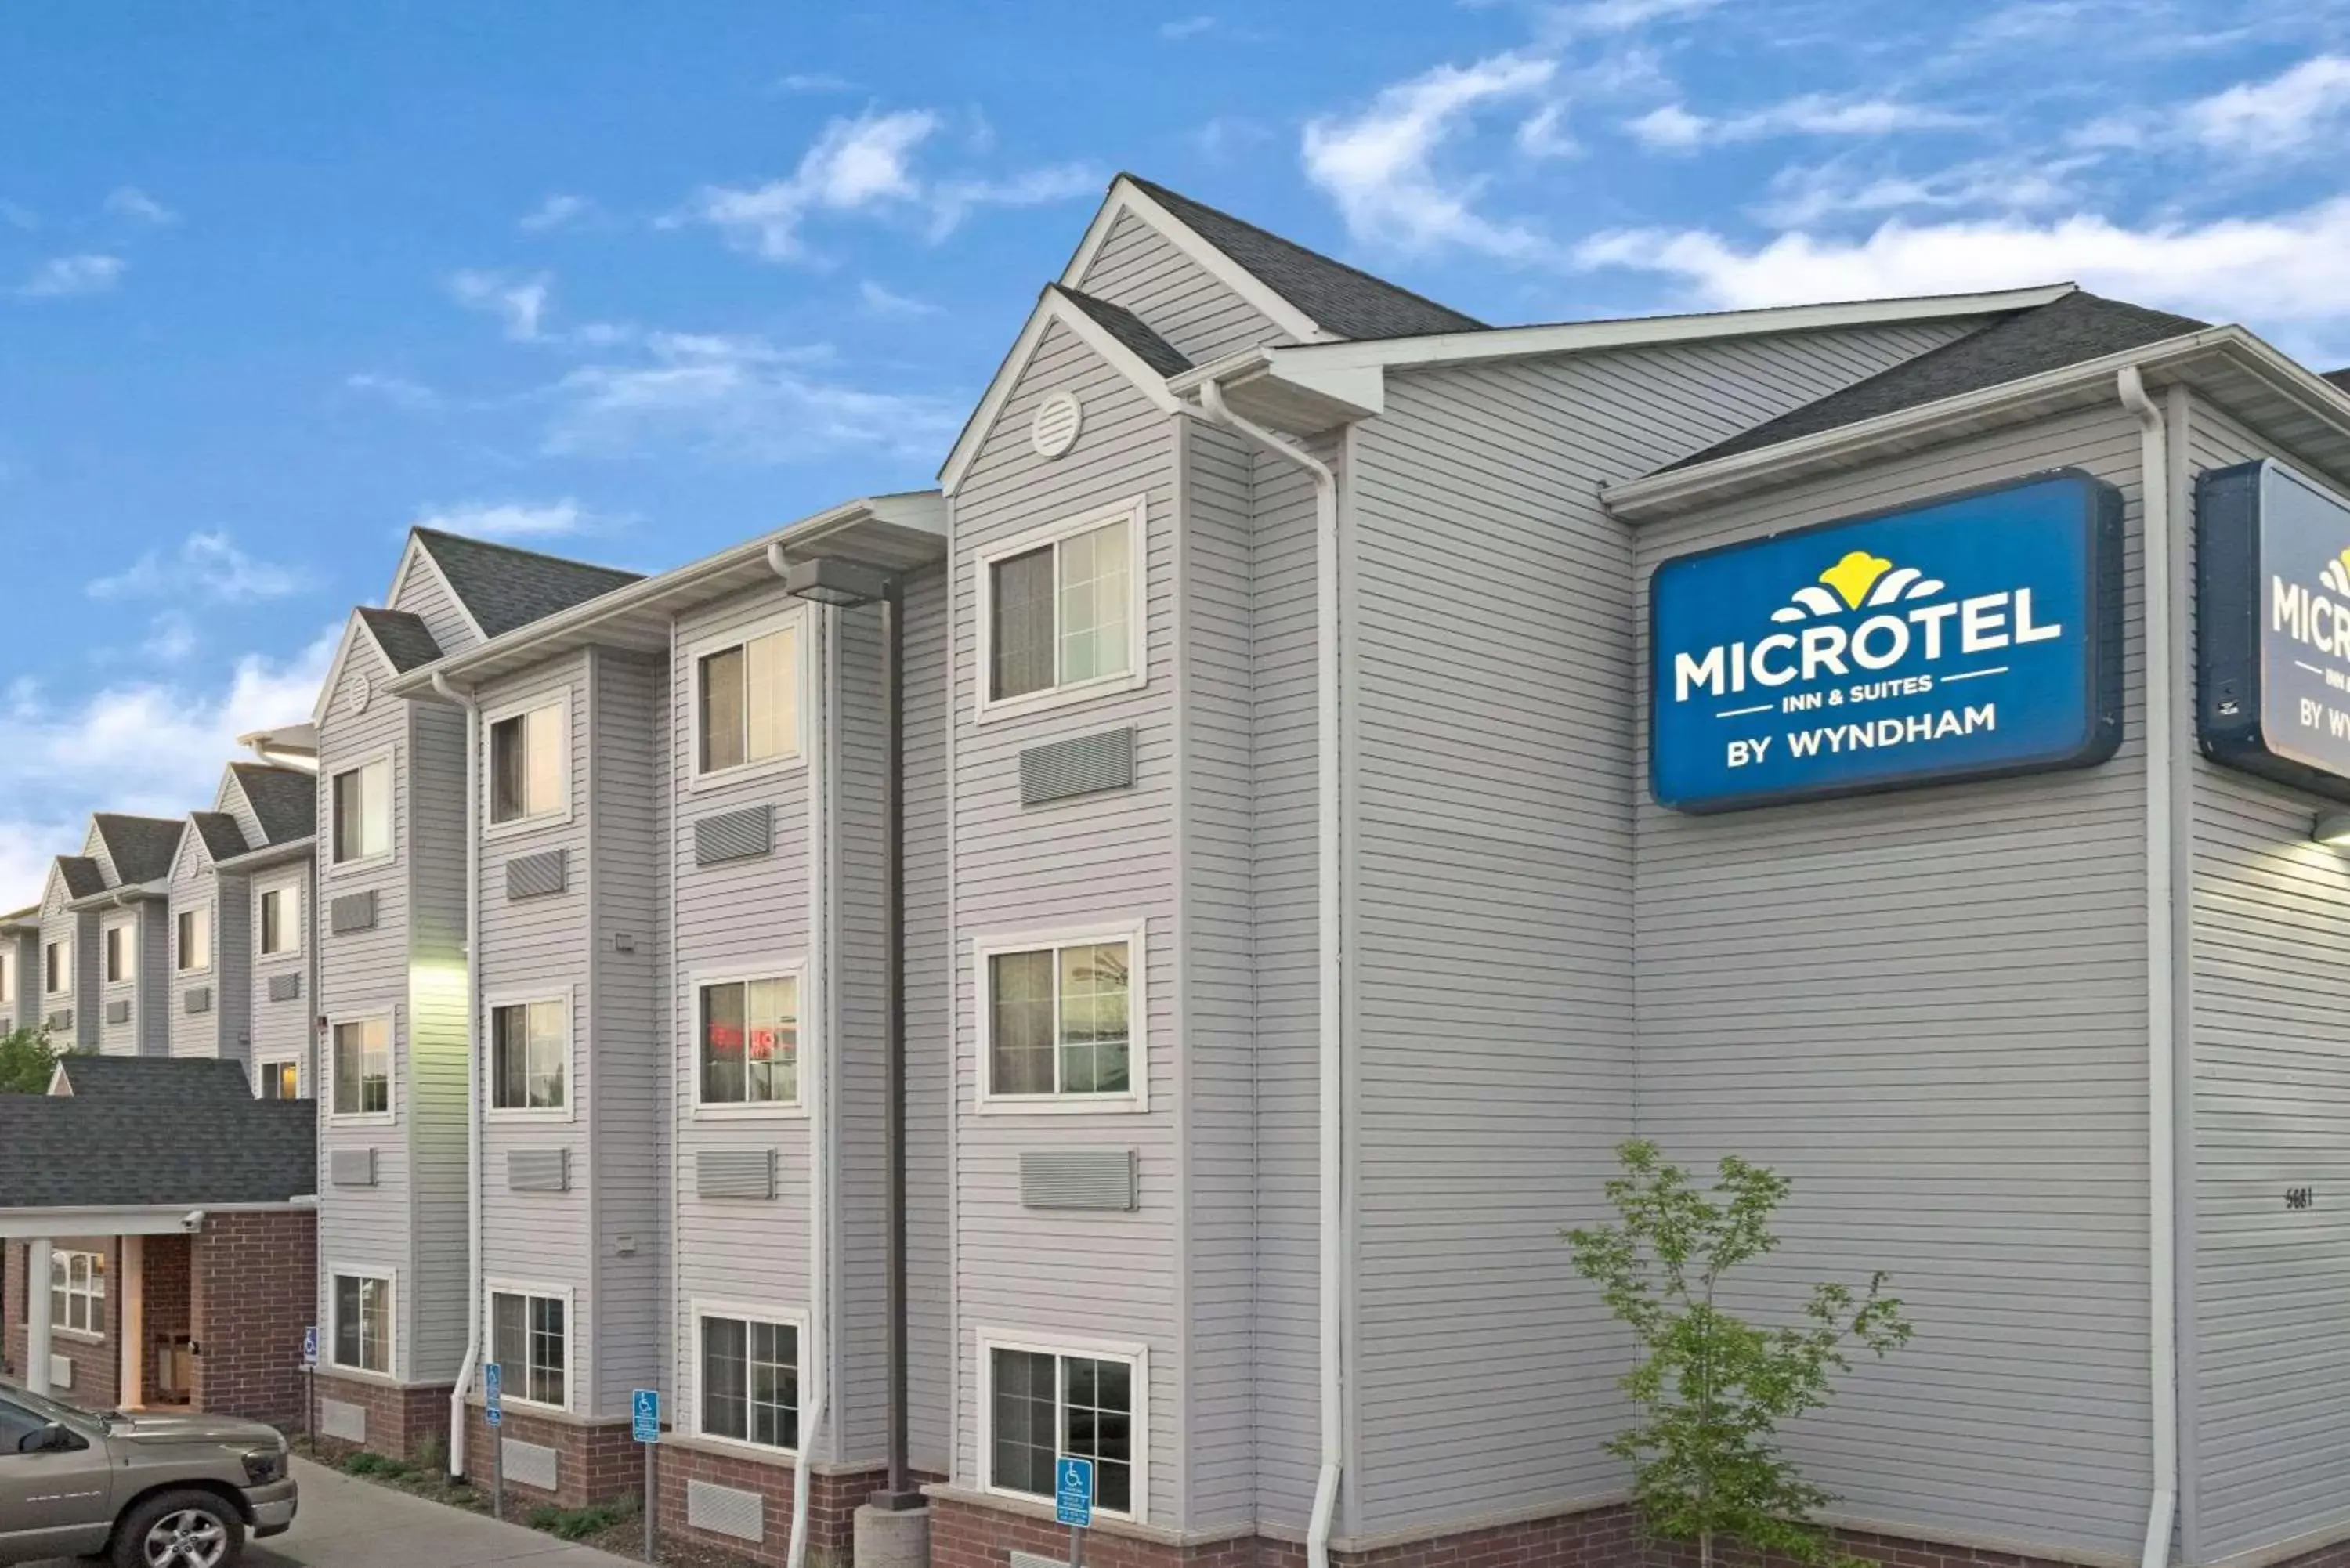 Property building in Microtel Inn and Suites - Inver Grove Heights